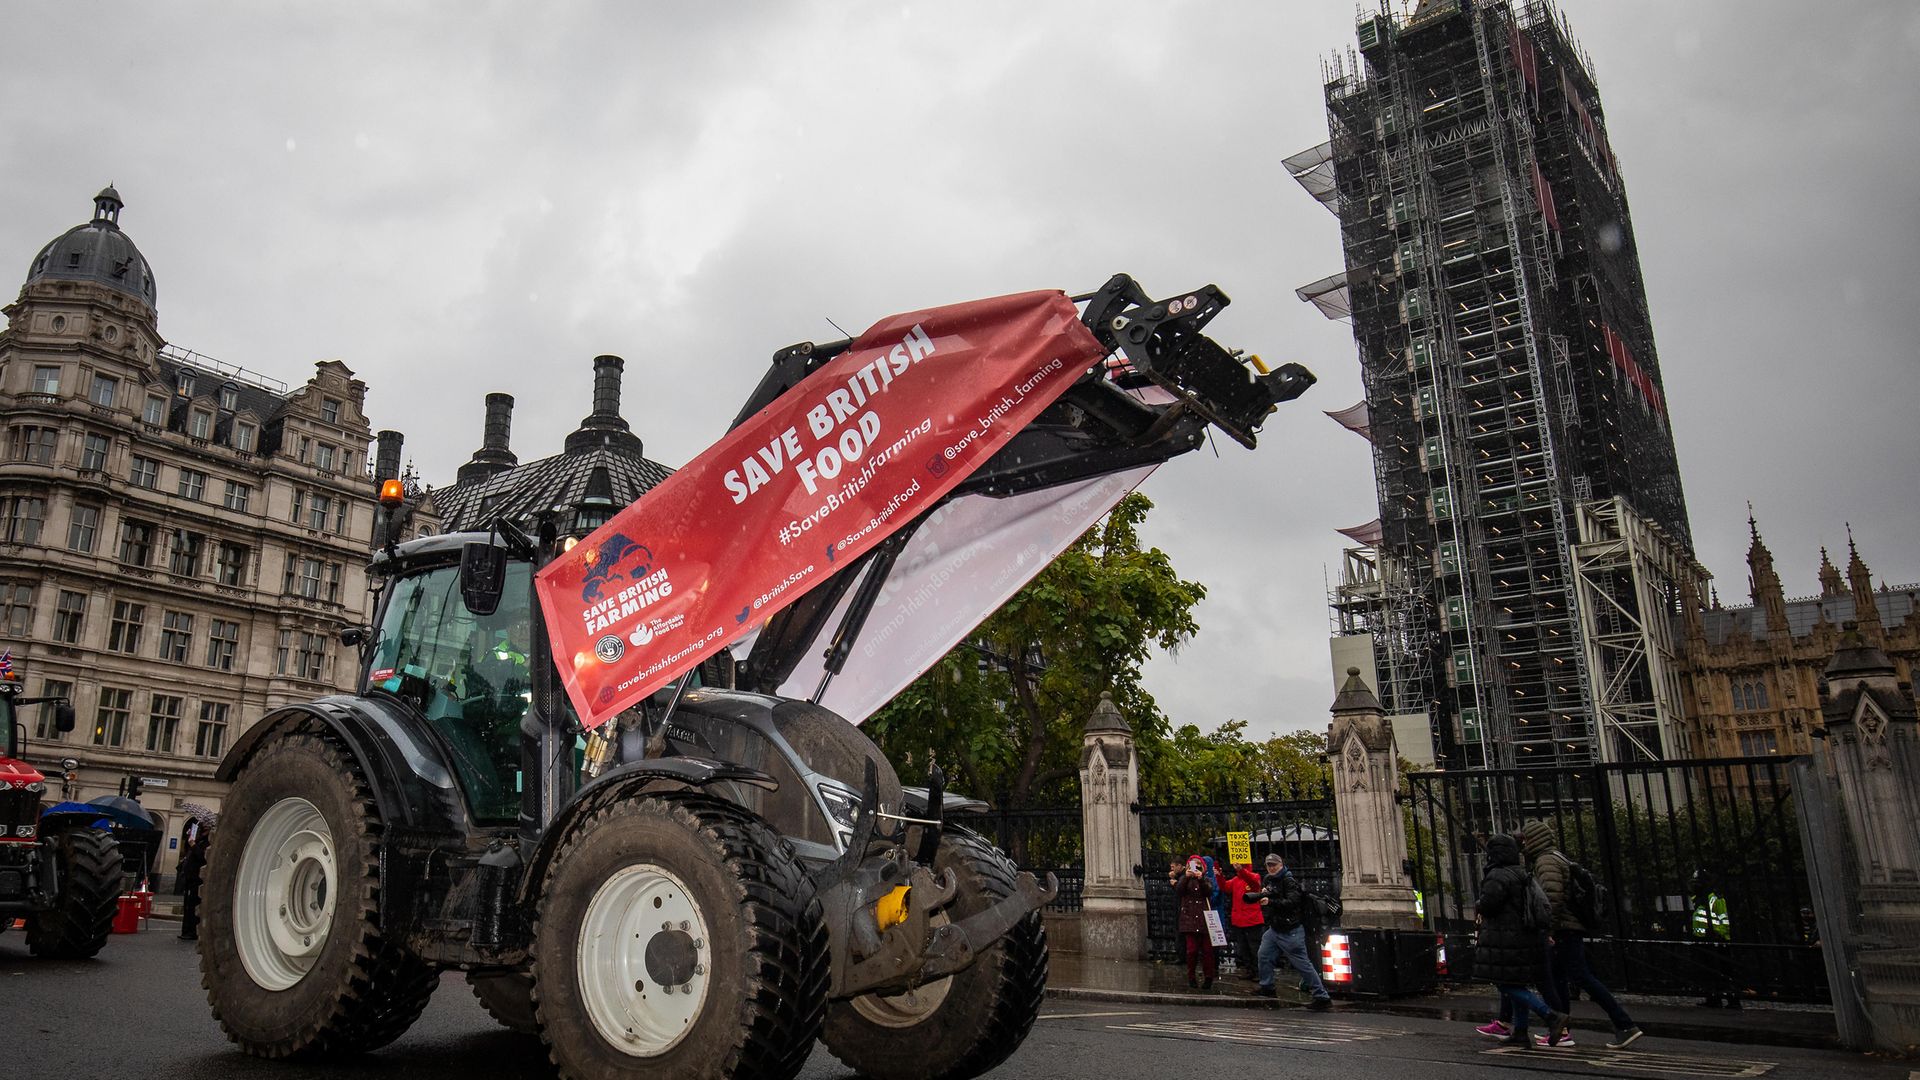 Farmers in tractors take part in a protest over food and farming standards, organised by Save British Farming (SBF), Westminster, London, on the day the amended Agricultural Bill returns to the House of Commons. - Credit: PA